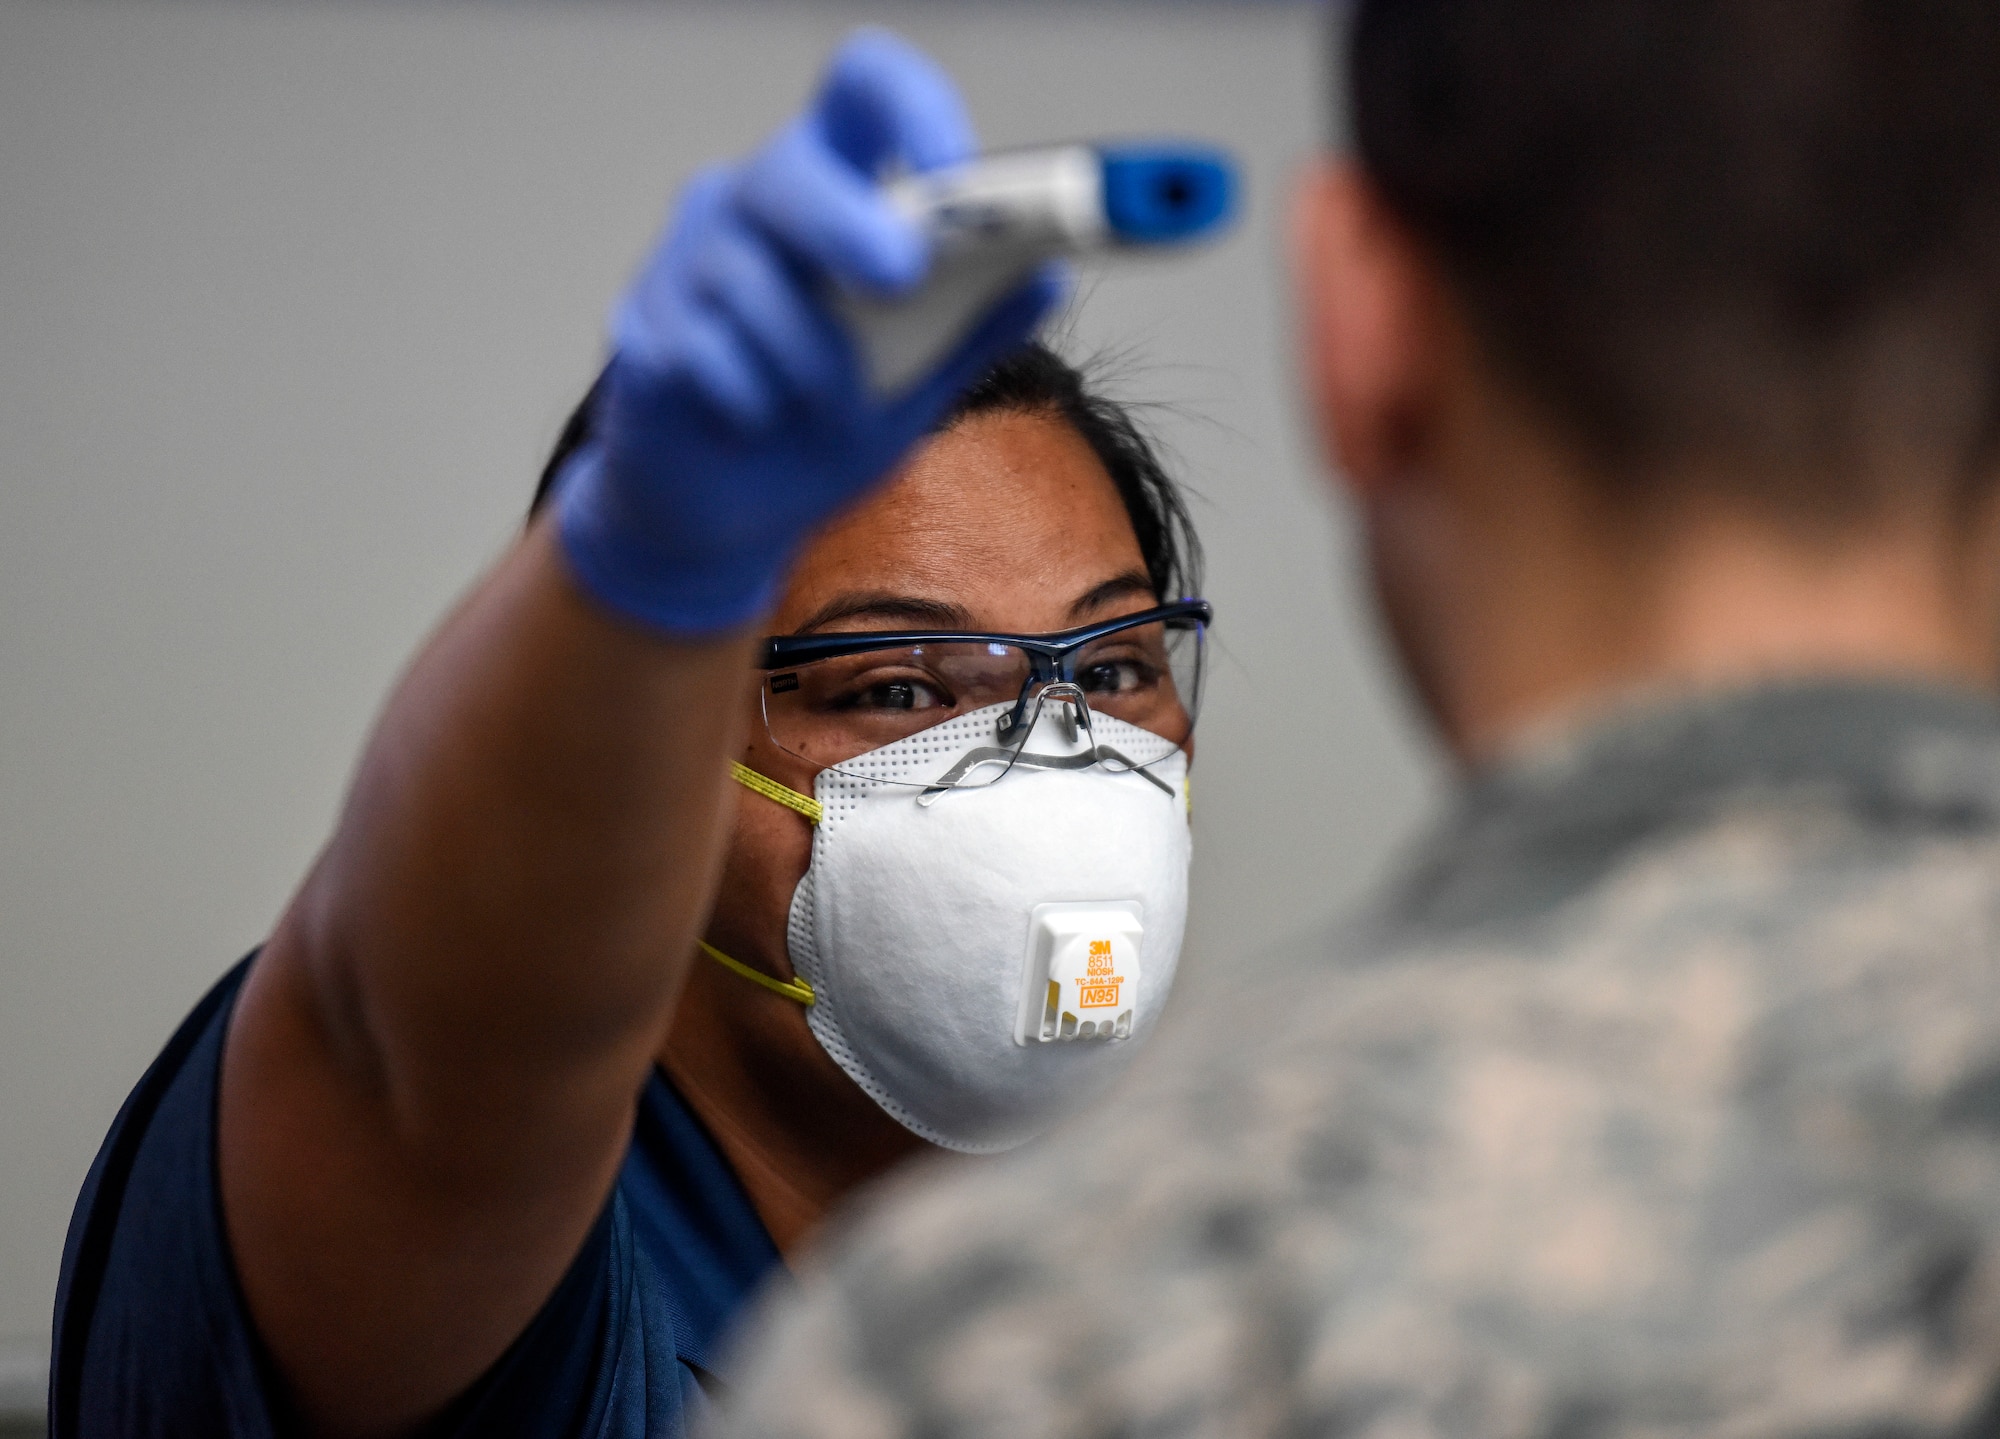 Kuhina Talimalie, 735th Air Mobility Squadron passenger service and baggage agent, tests a no-touch thermometer on an Airman at the Air Mobility Command Passenger Terminal at Joint Base Pearl Harbor-Hickam, Hawaii, March 25, 2020. Passenger terminal Airmen are screening passengers for fevers to help mitigate the spread of COVID-19. (U.S. Air Force photo by Tech. Sgt. Anthony Nelson Jr.)